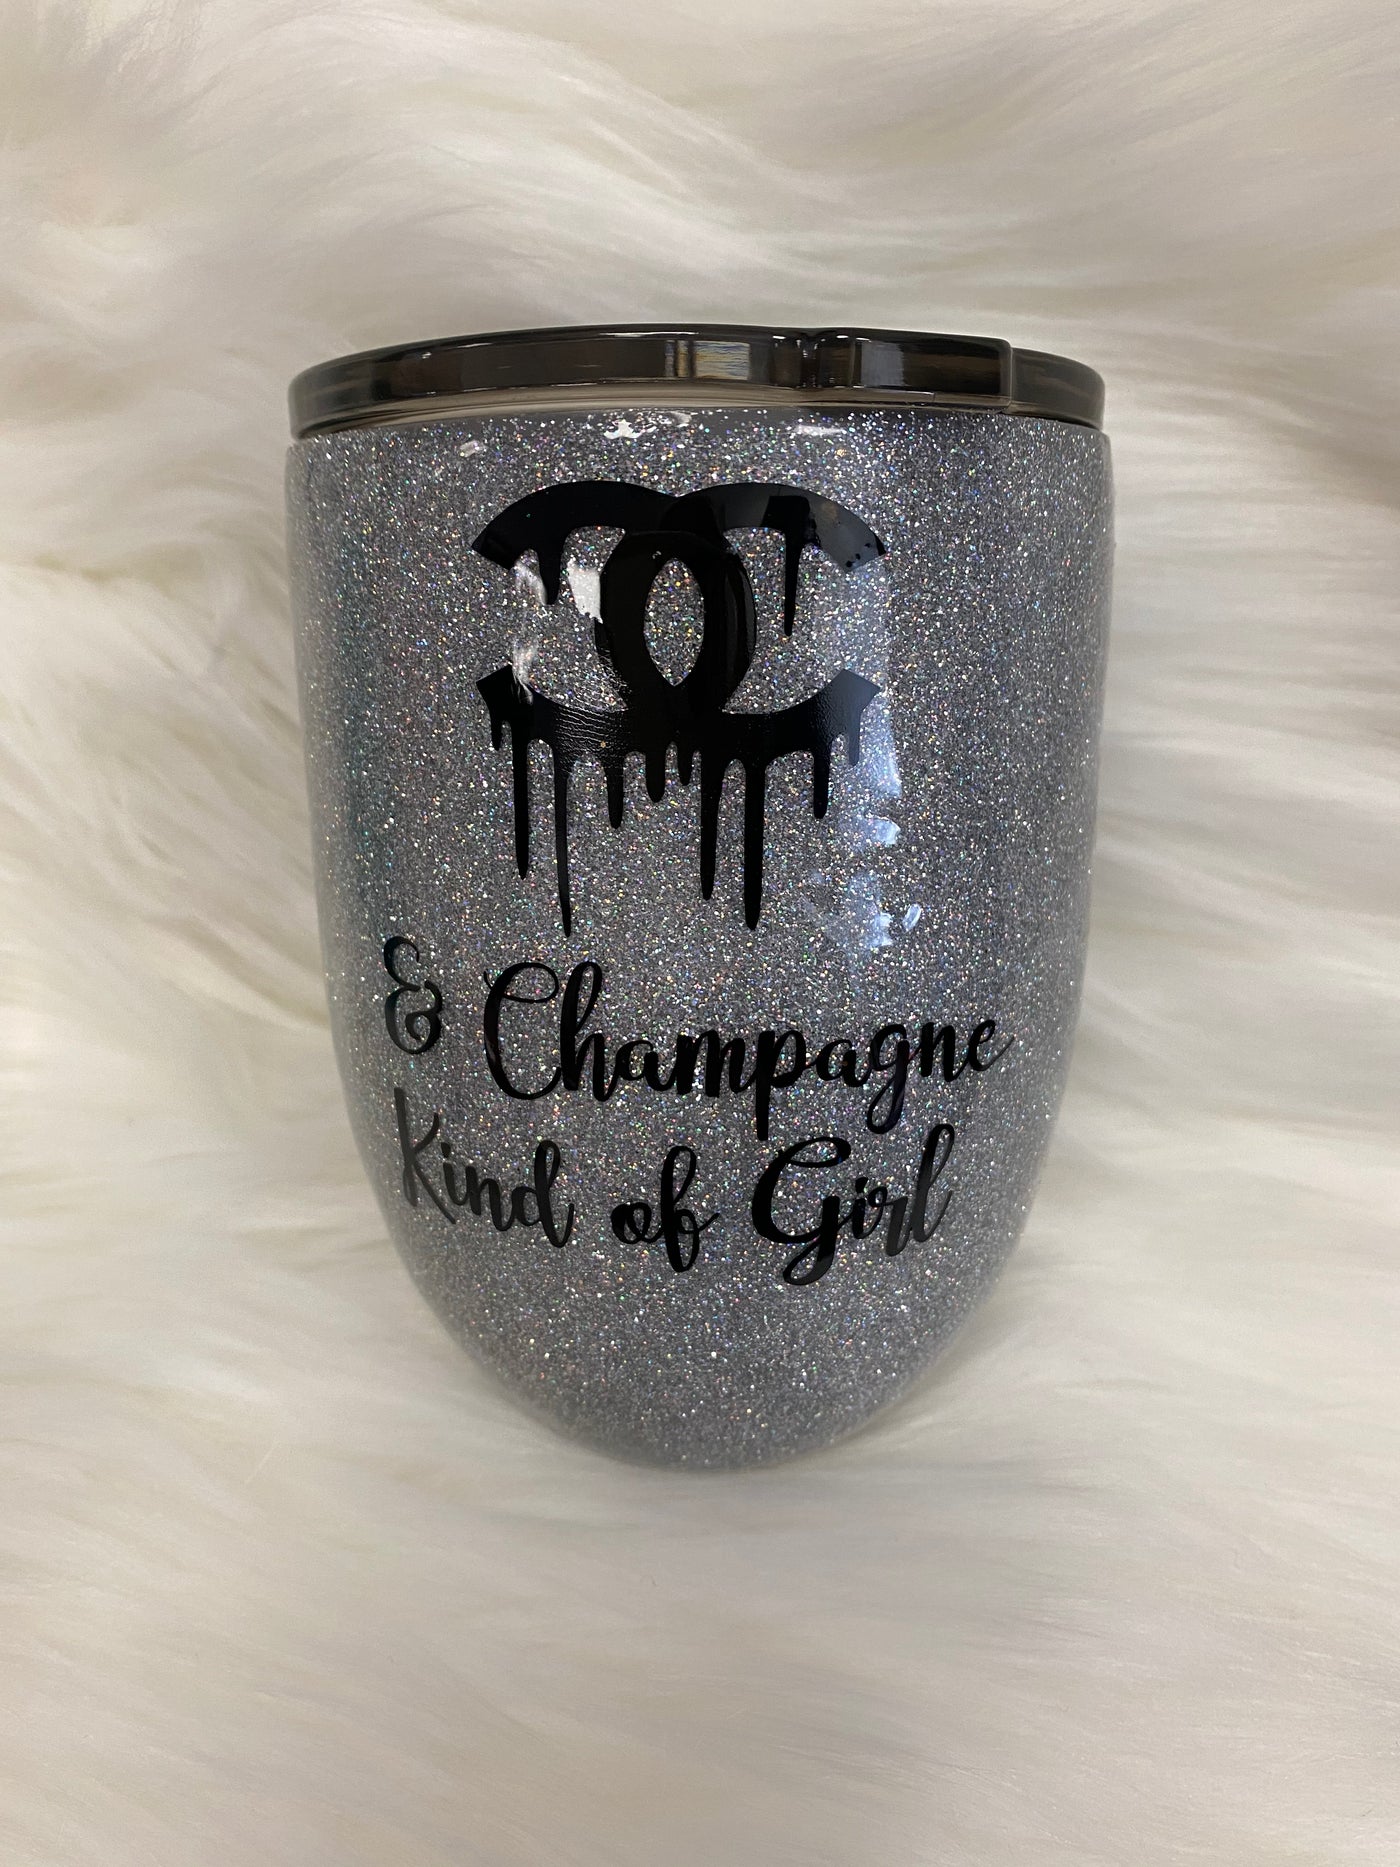 Chanel & Champagne Kind of Girl Wine Sippers (3 Colors)